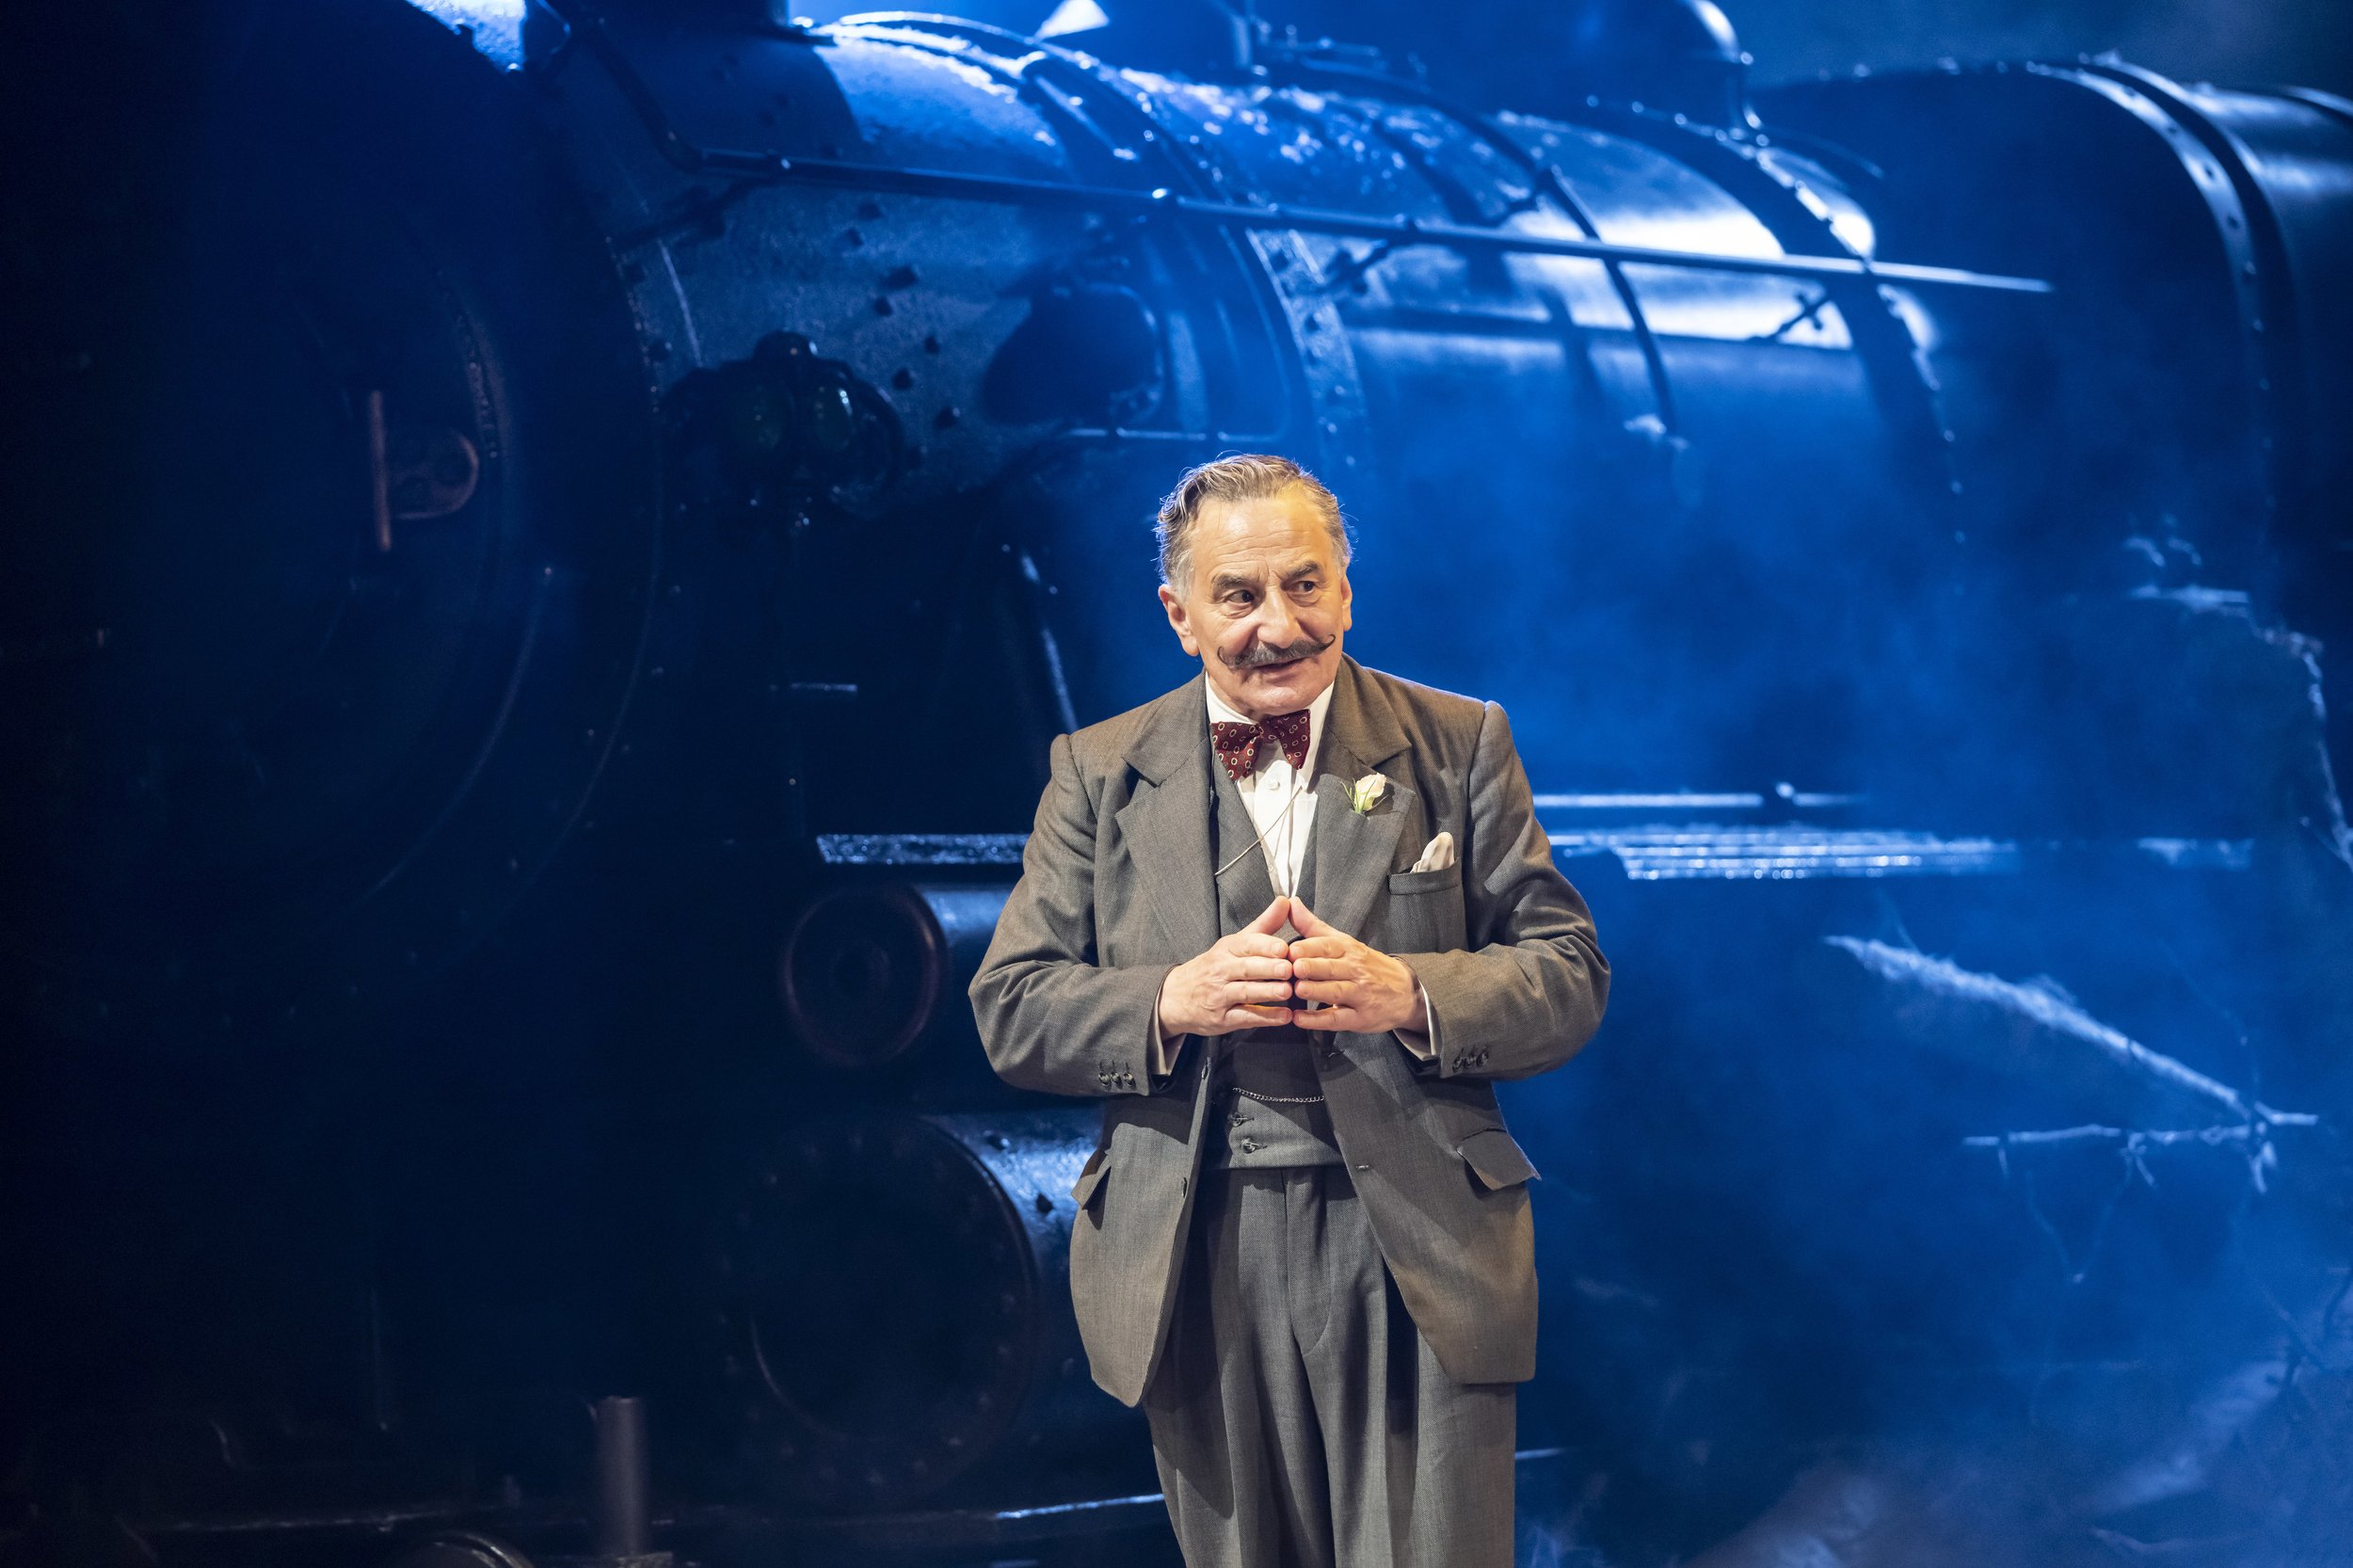 Henry-Goodman-as-Hercule-Poirot-in-Murder-on-the-Orient-Express-at-Chichester-Festival-Theatre-Photo-Johan-Persson_78874-Edit.jpg